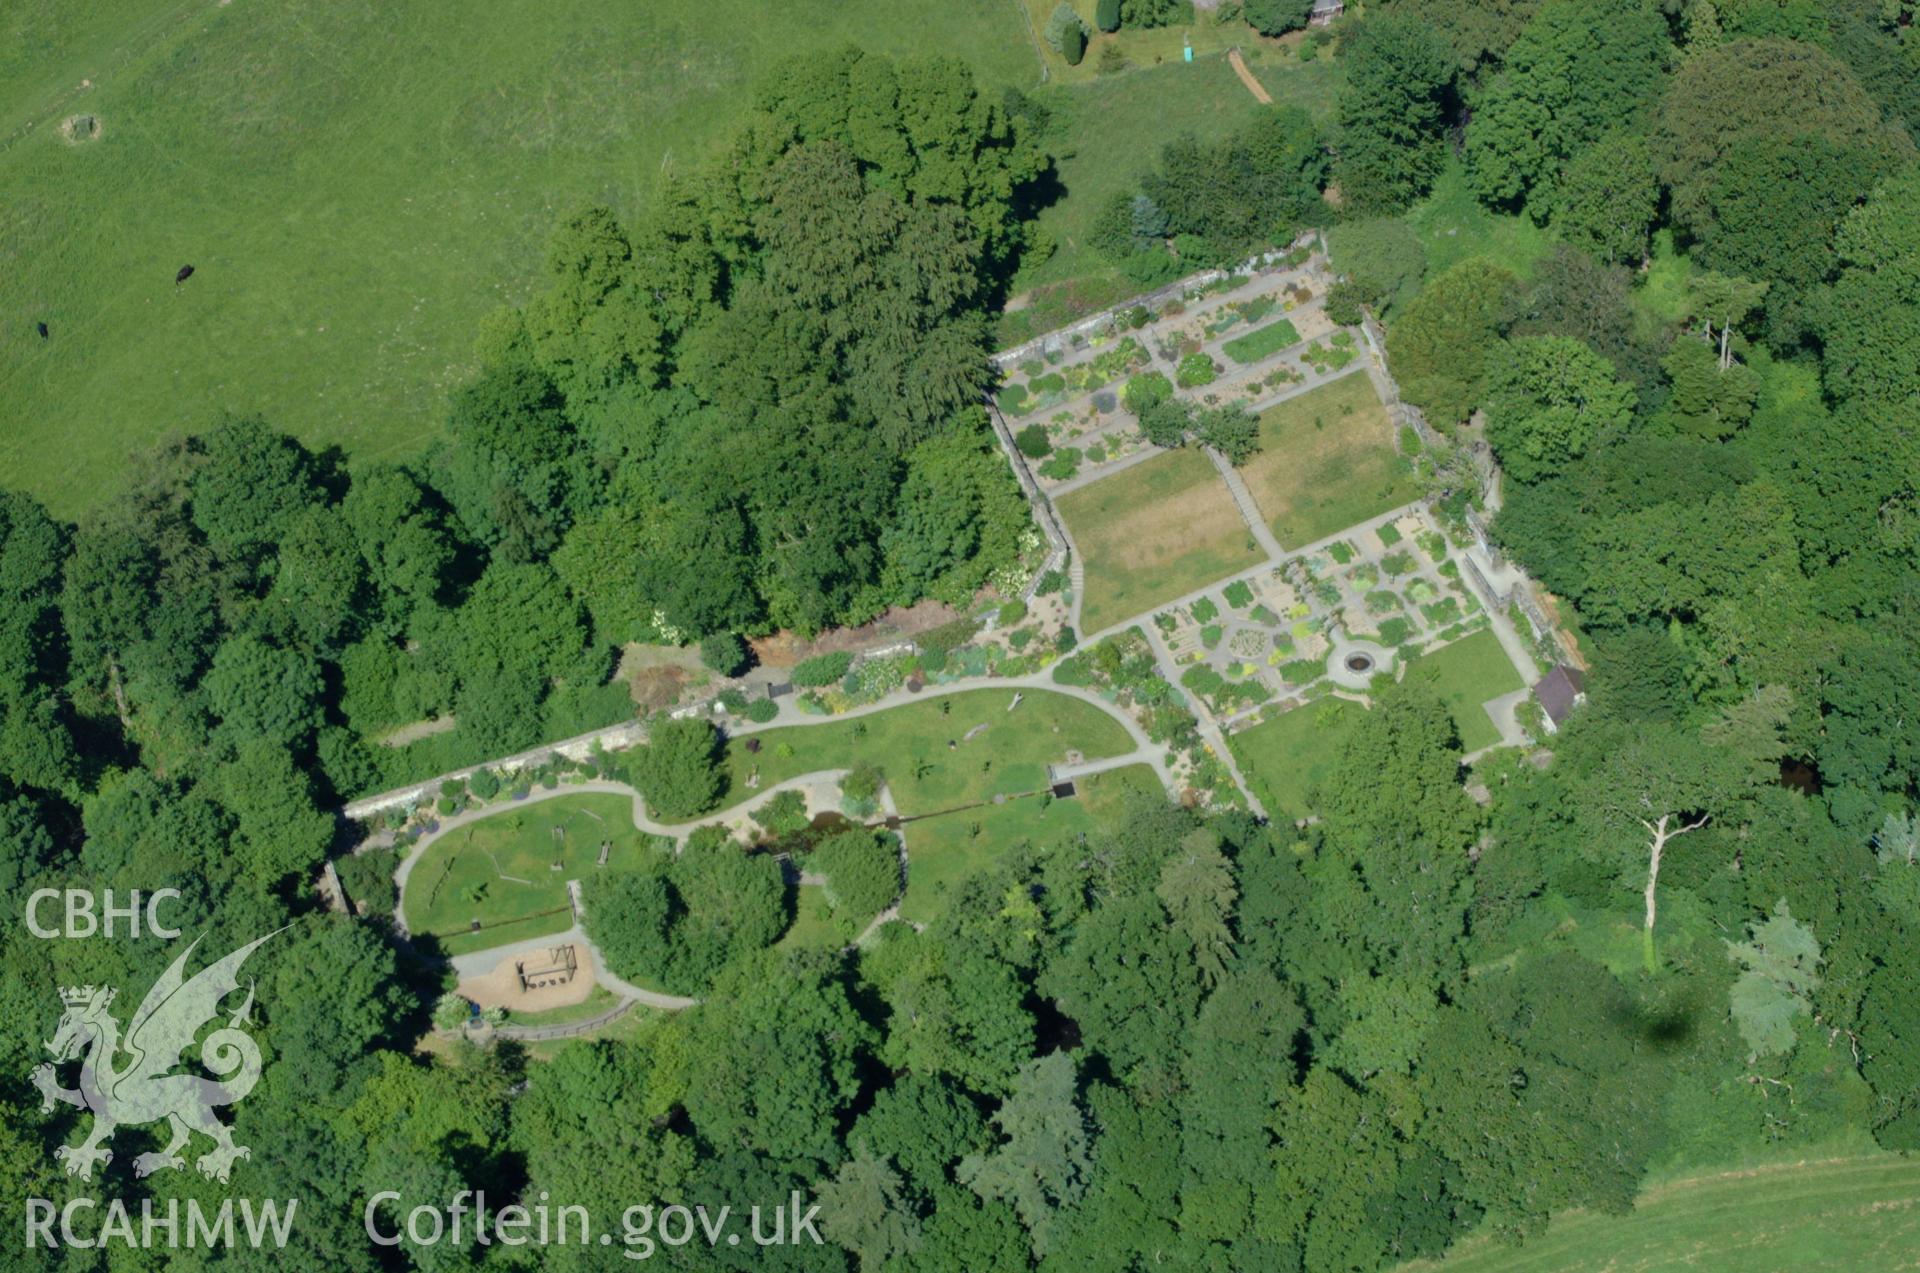 RCAHMW colour oblique aerial photograph of Ty Glyn Garden taken on 14/06/2004 by Toby Driver